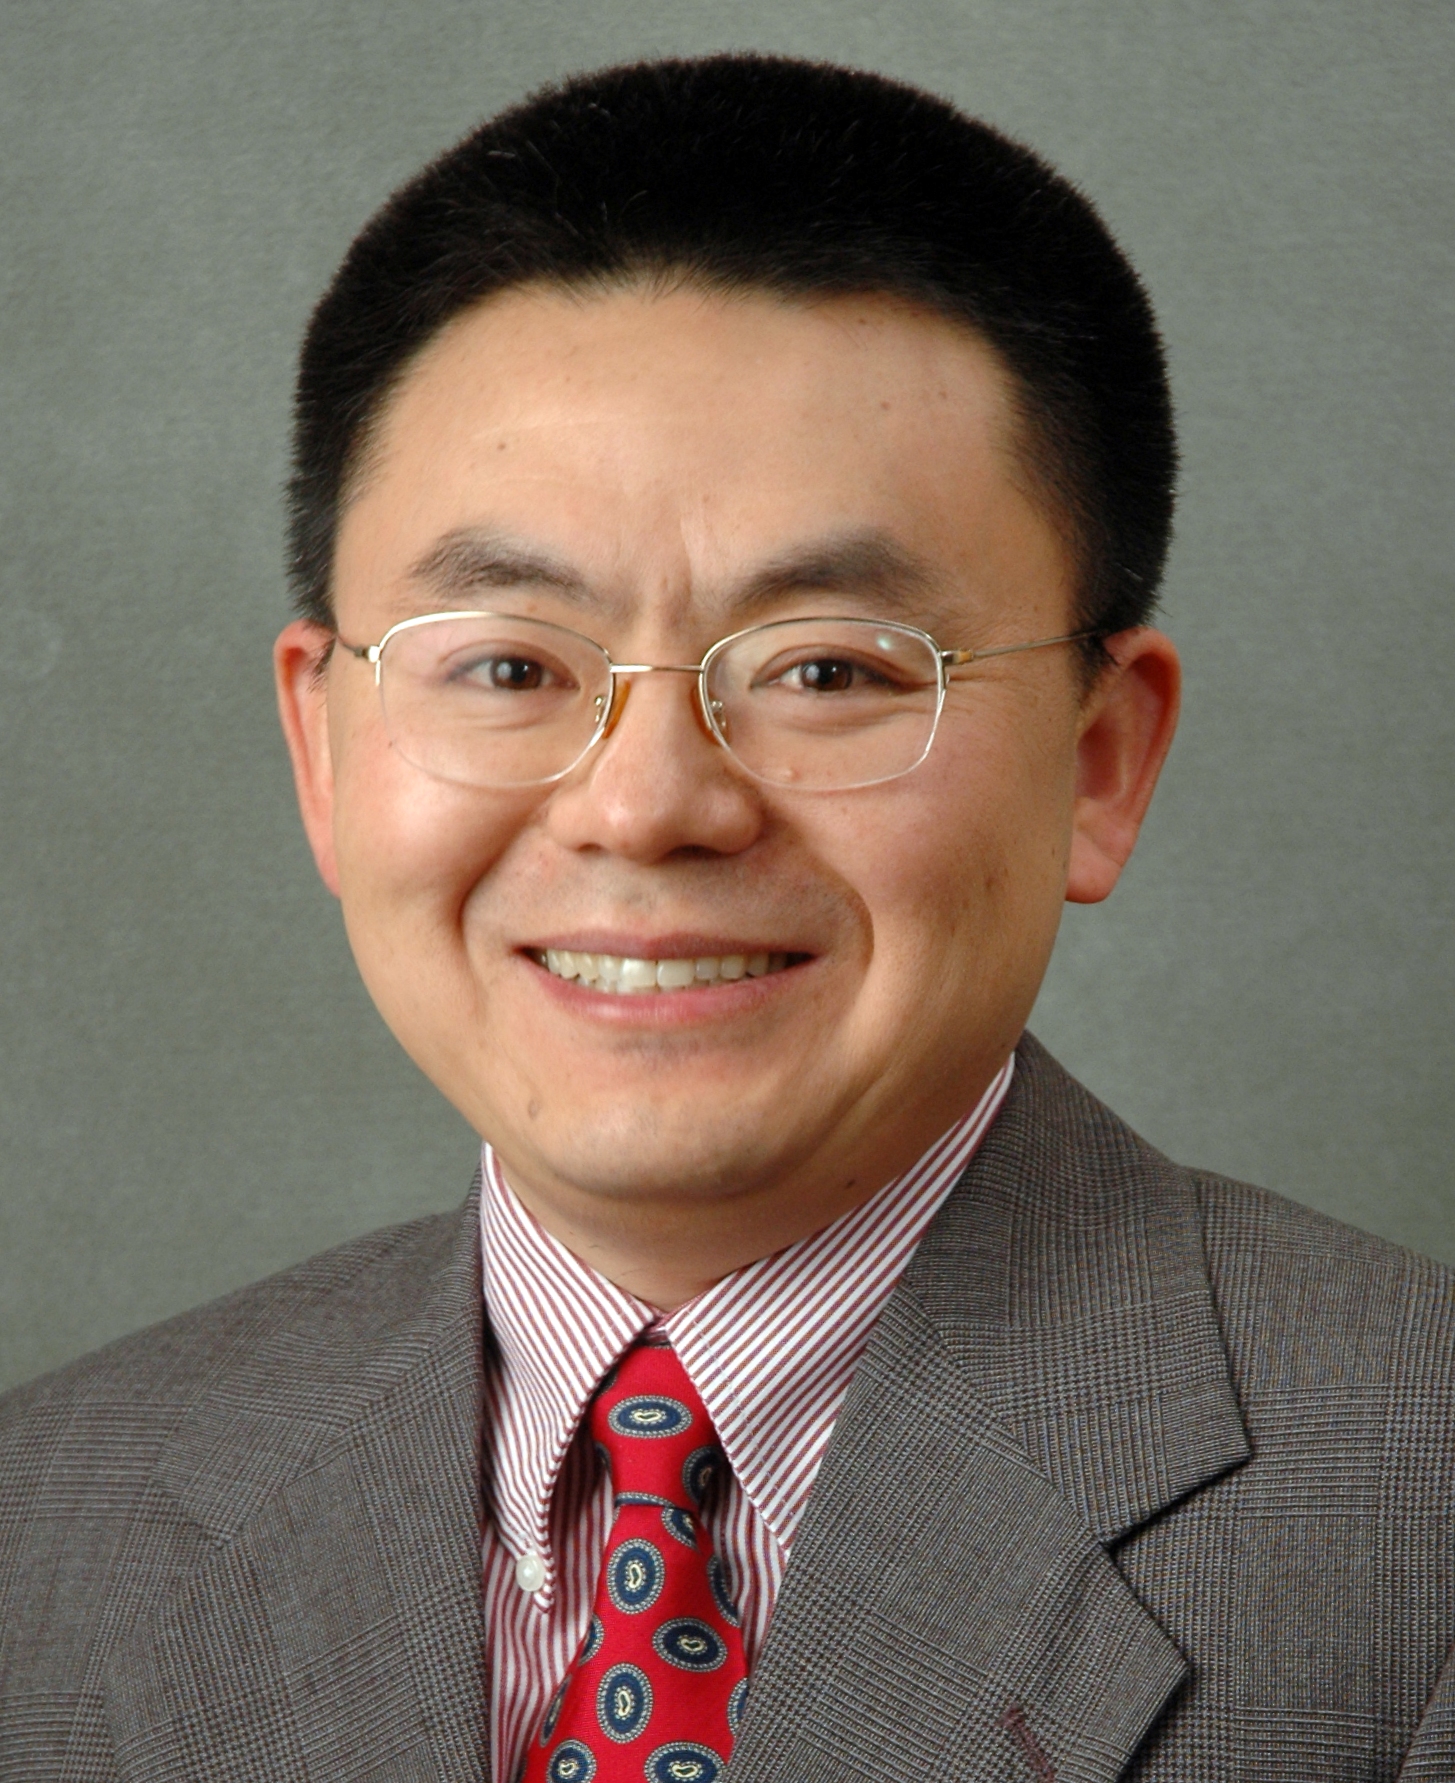 headshot of JC Zhao smiling and looking directly at the camera while wearing wire-rimmed glasses with a striped dress shirt, necktie, and dark suit jacket